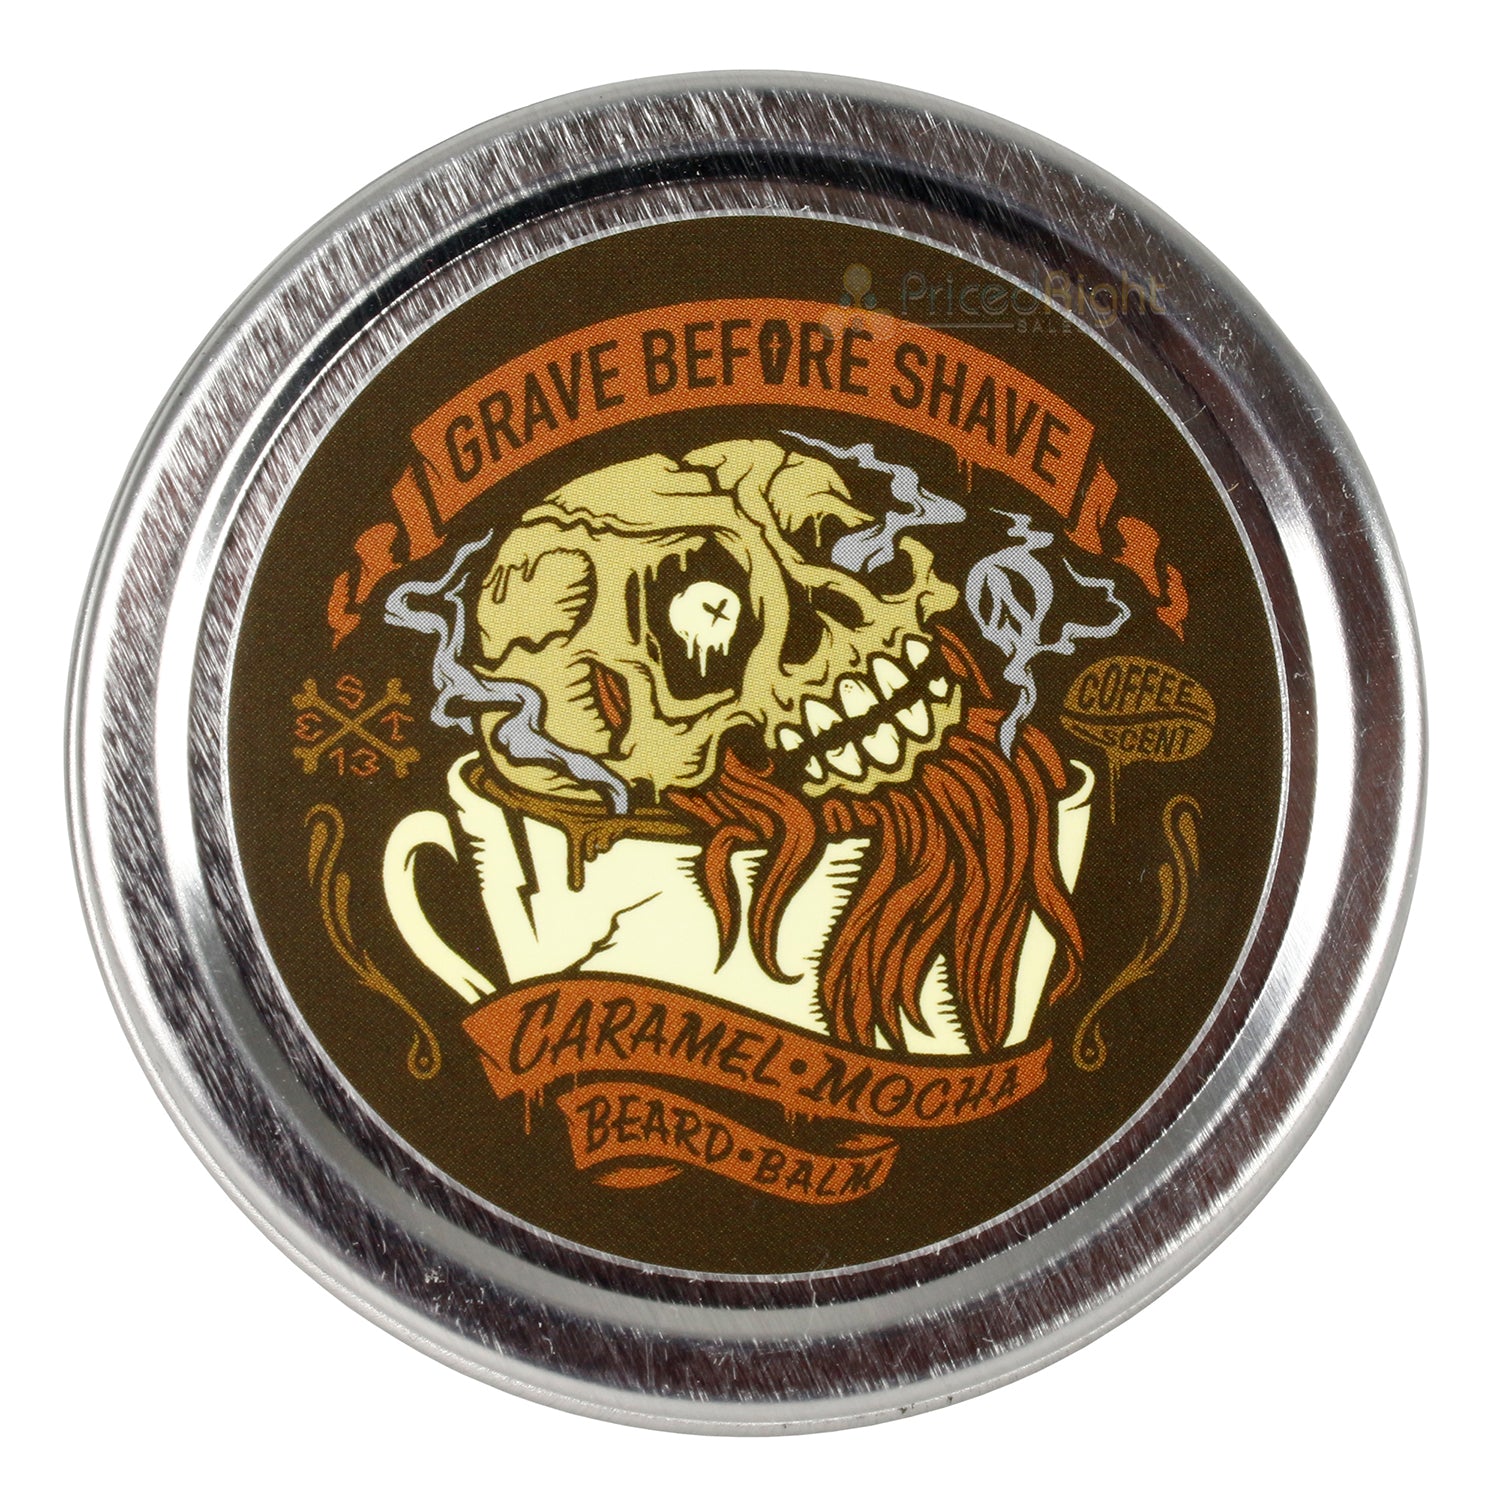 Grave Before Shave Handcrafted Beard Balm Caramel Mocha Coffee Scent 2 Ounce